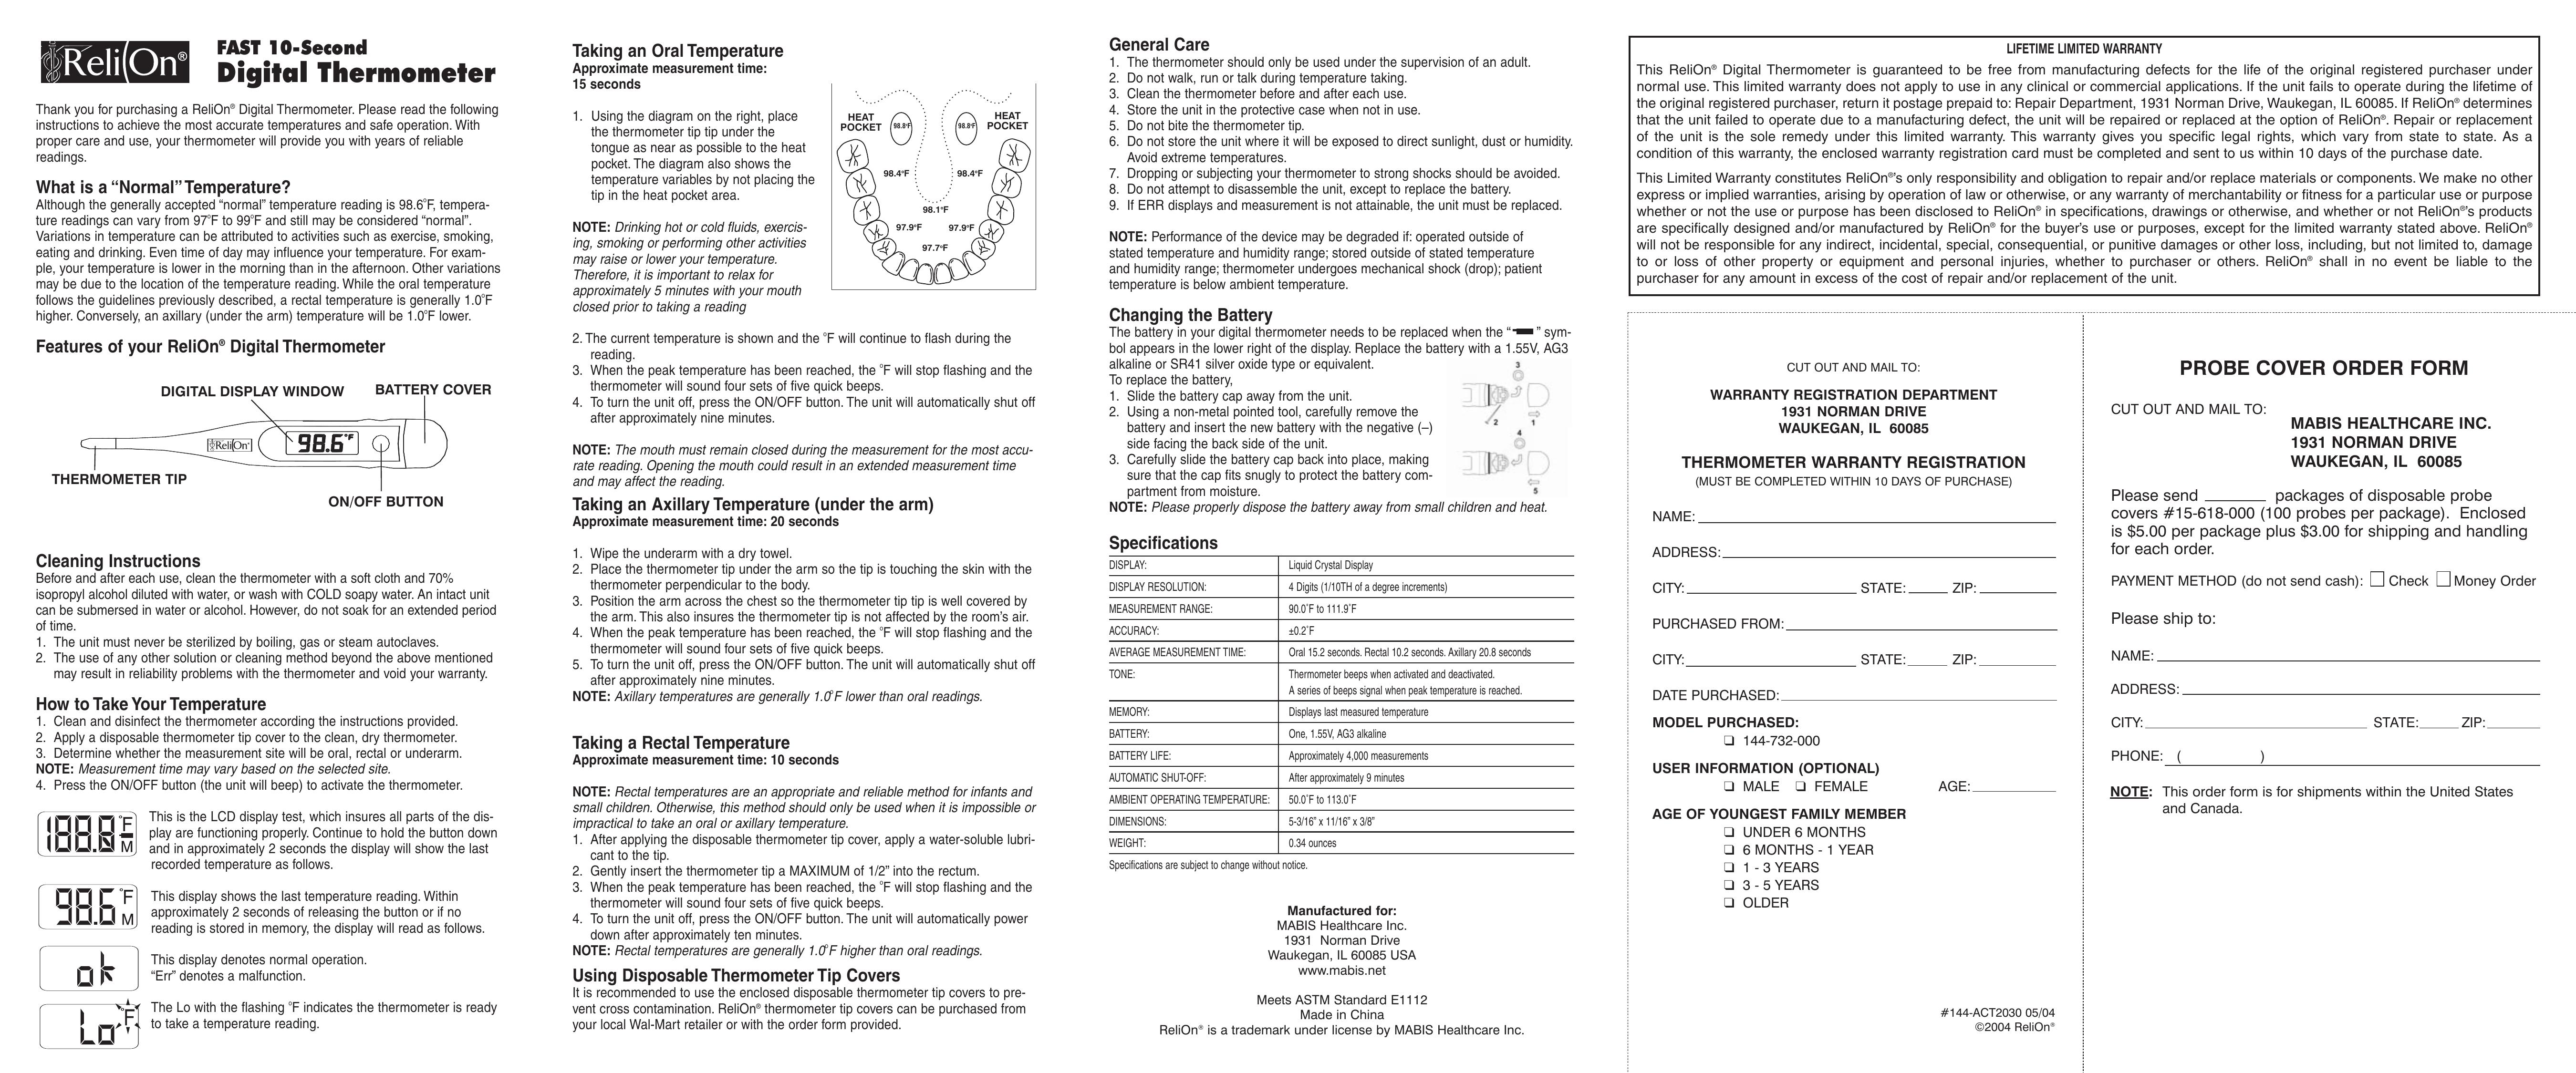 ReliOn K 144-732-000 Thermometer User Manual